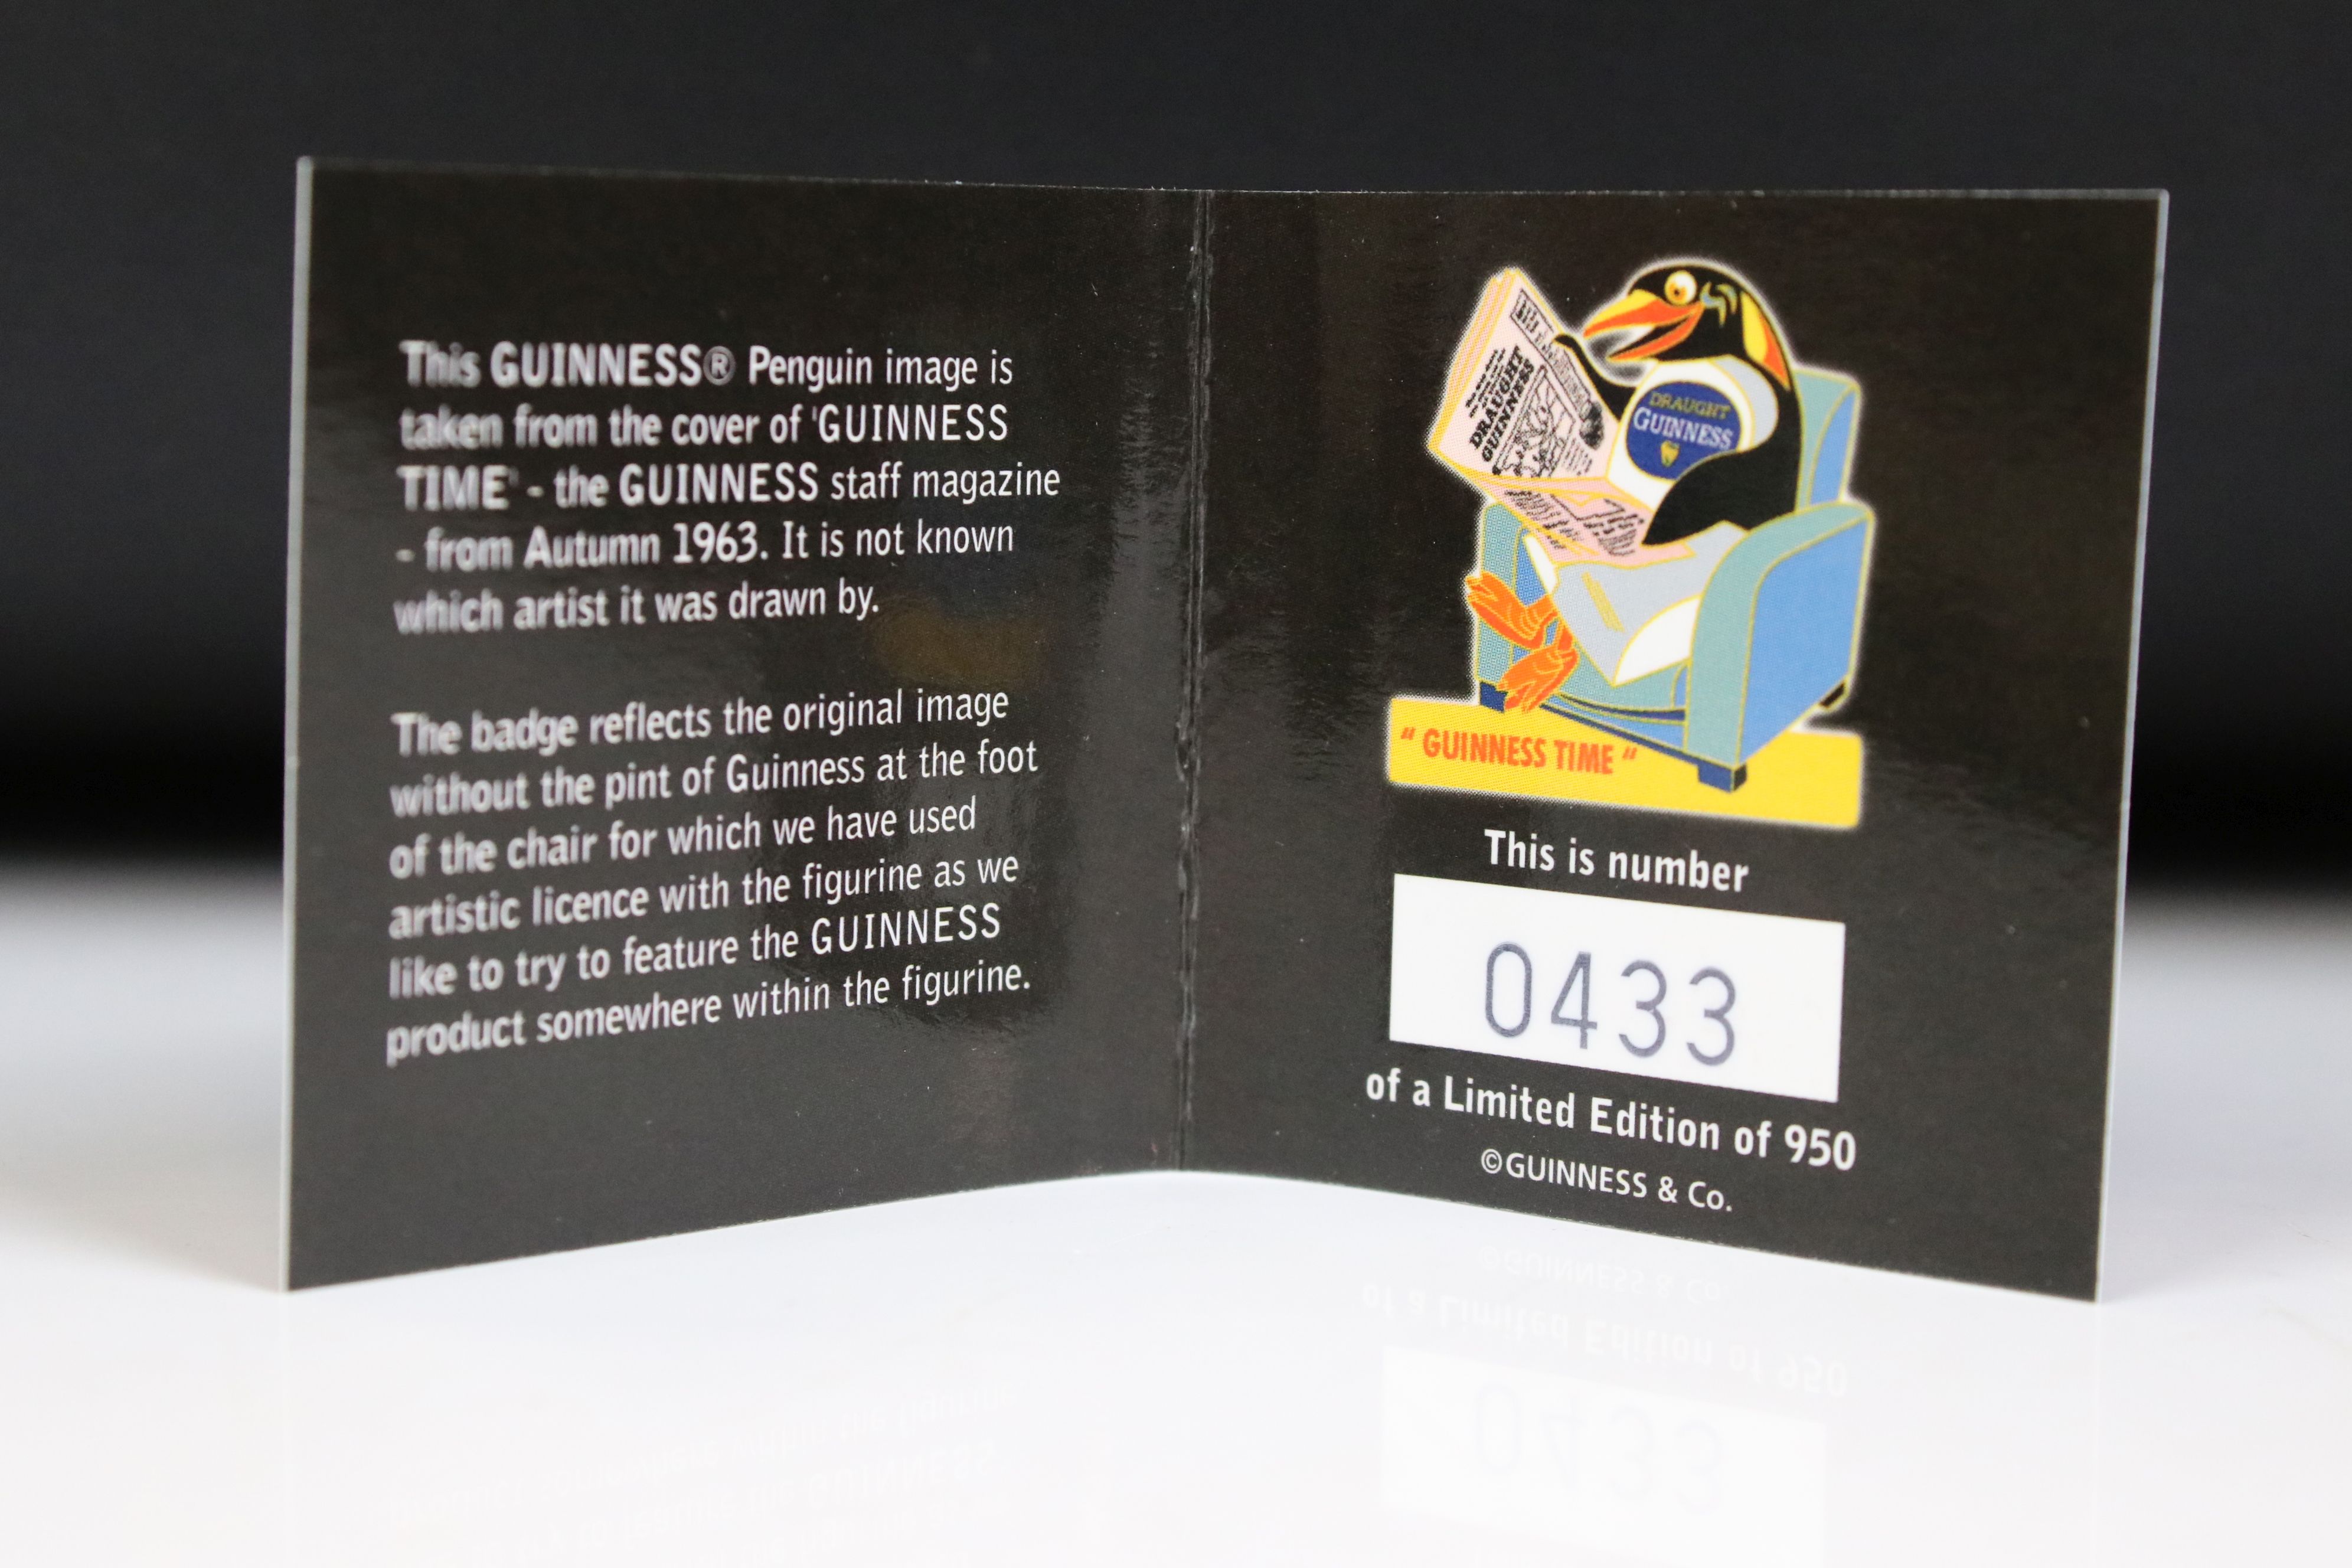 Royal Doulton Guinness Penguin, MCL22, limited edition number 581, with certificate of - Image 7 of 8